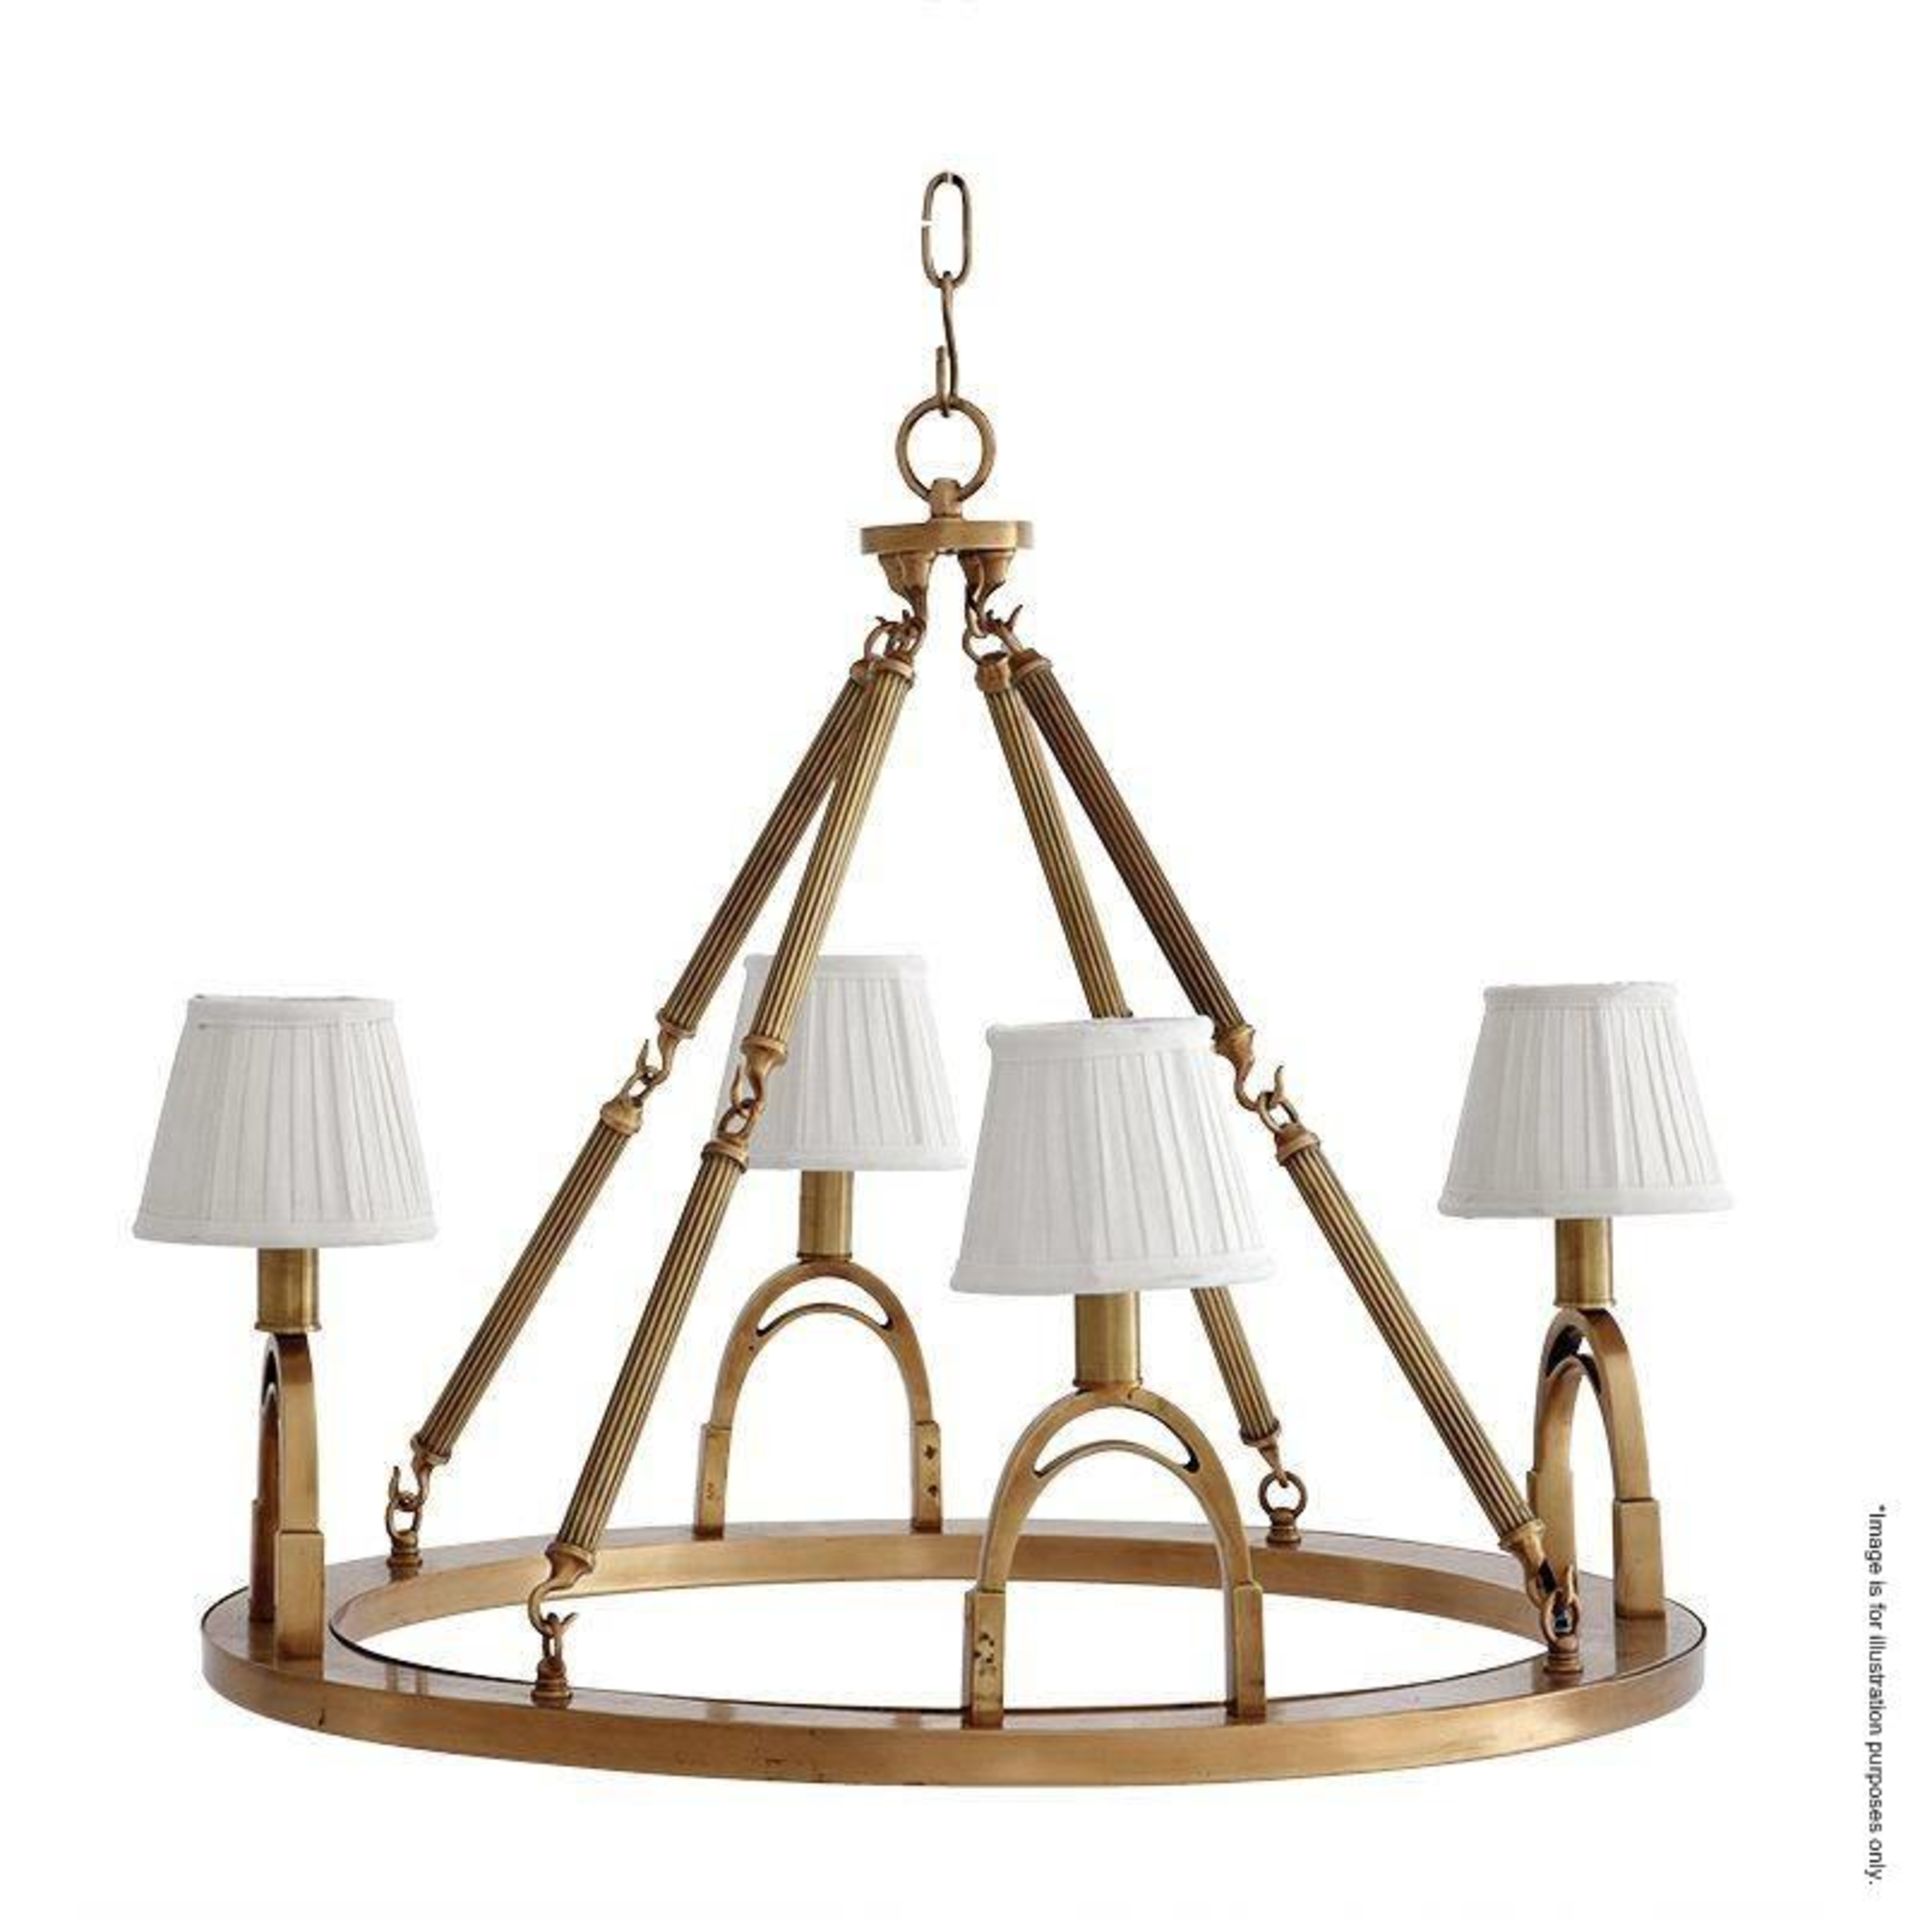 1 x Eichholtz 'Jigger' Equestrian-inspired Chandelier With An Aged Brass Finish - Includes 2 x Sets - Image 4 of 15